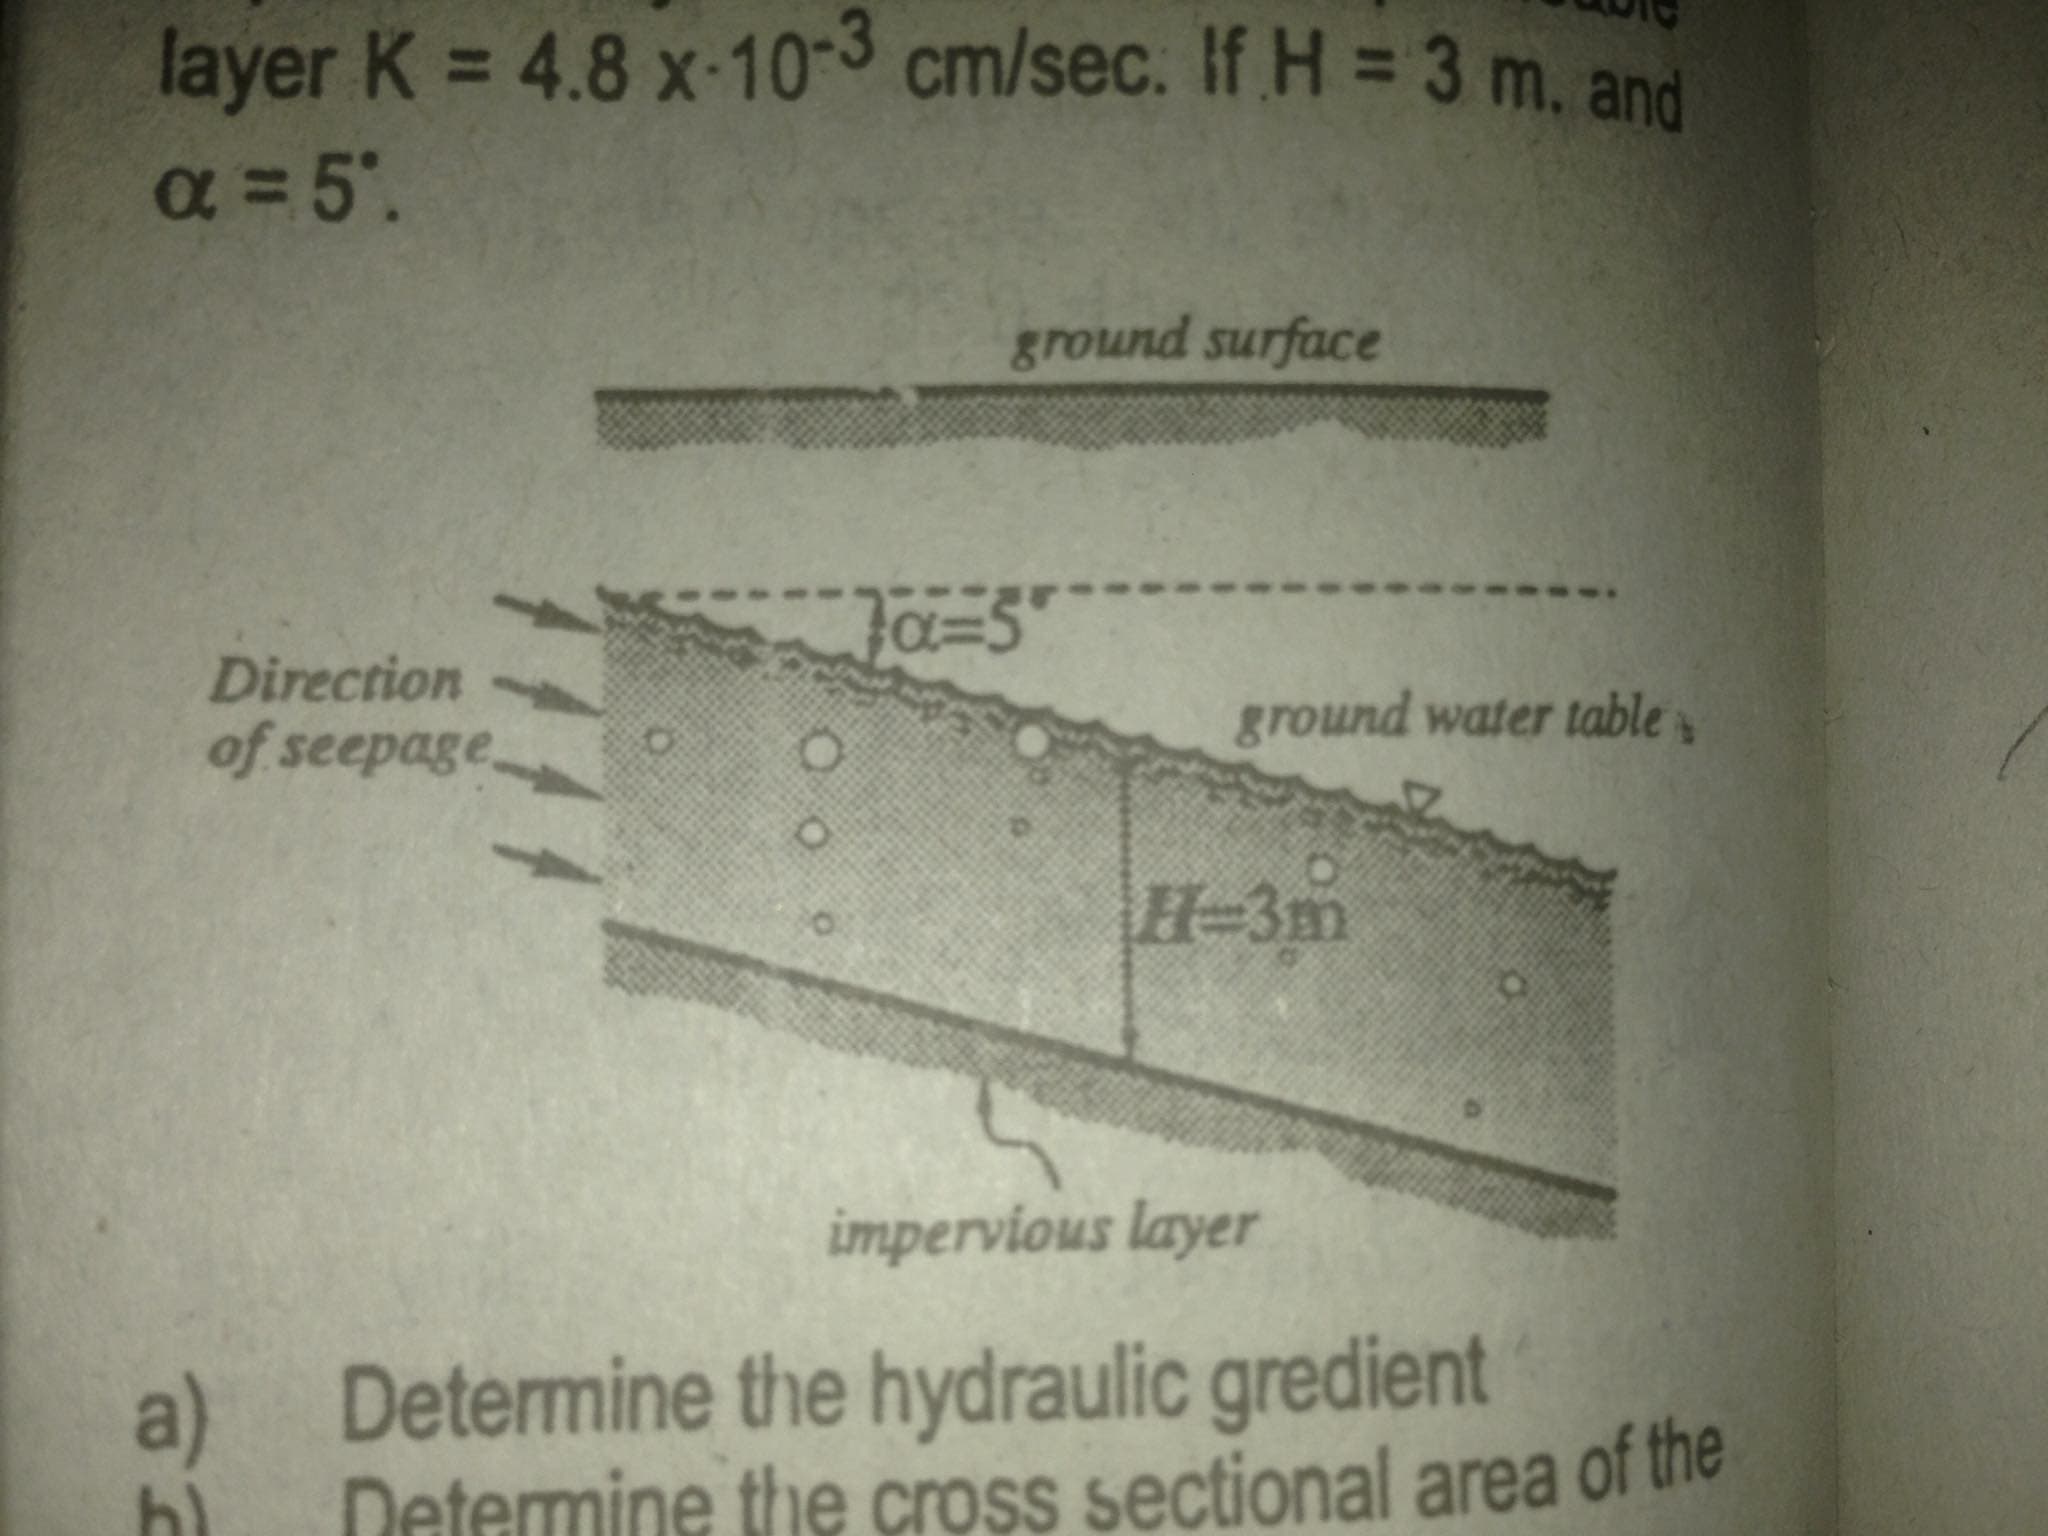 %3D
a = 5'.
ground surface
Direction
ground water table
of seepage.
H-3m
impervious layer
a)
Determine the hydraulic gredient
Determine the cross sectional area of the
